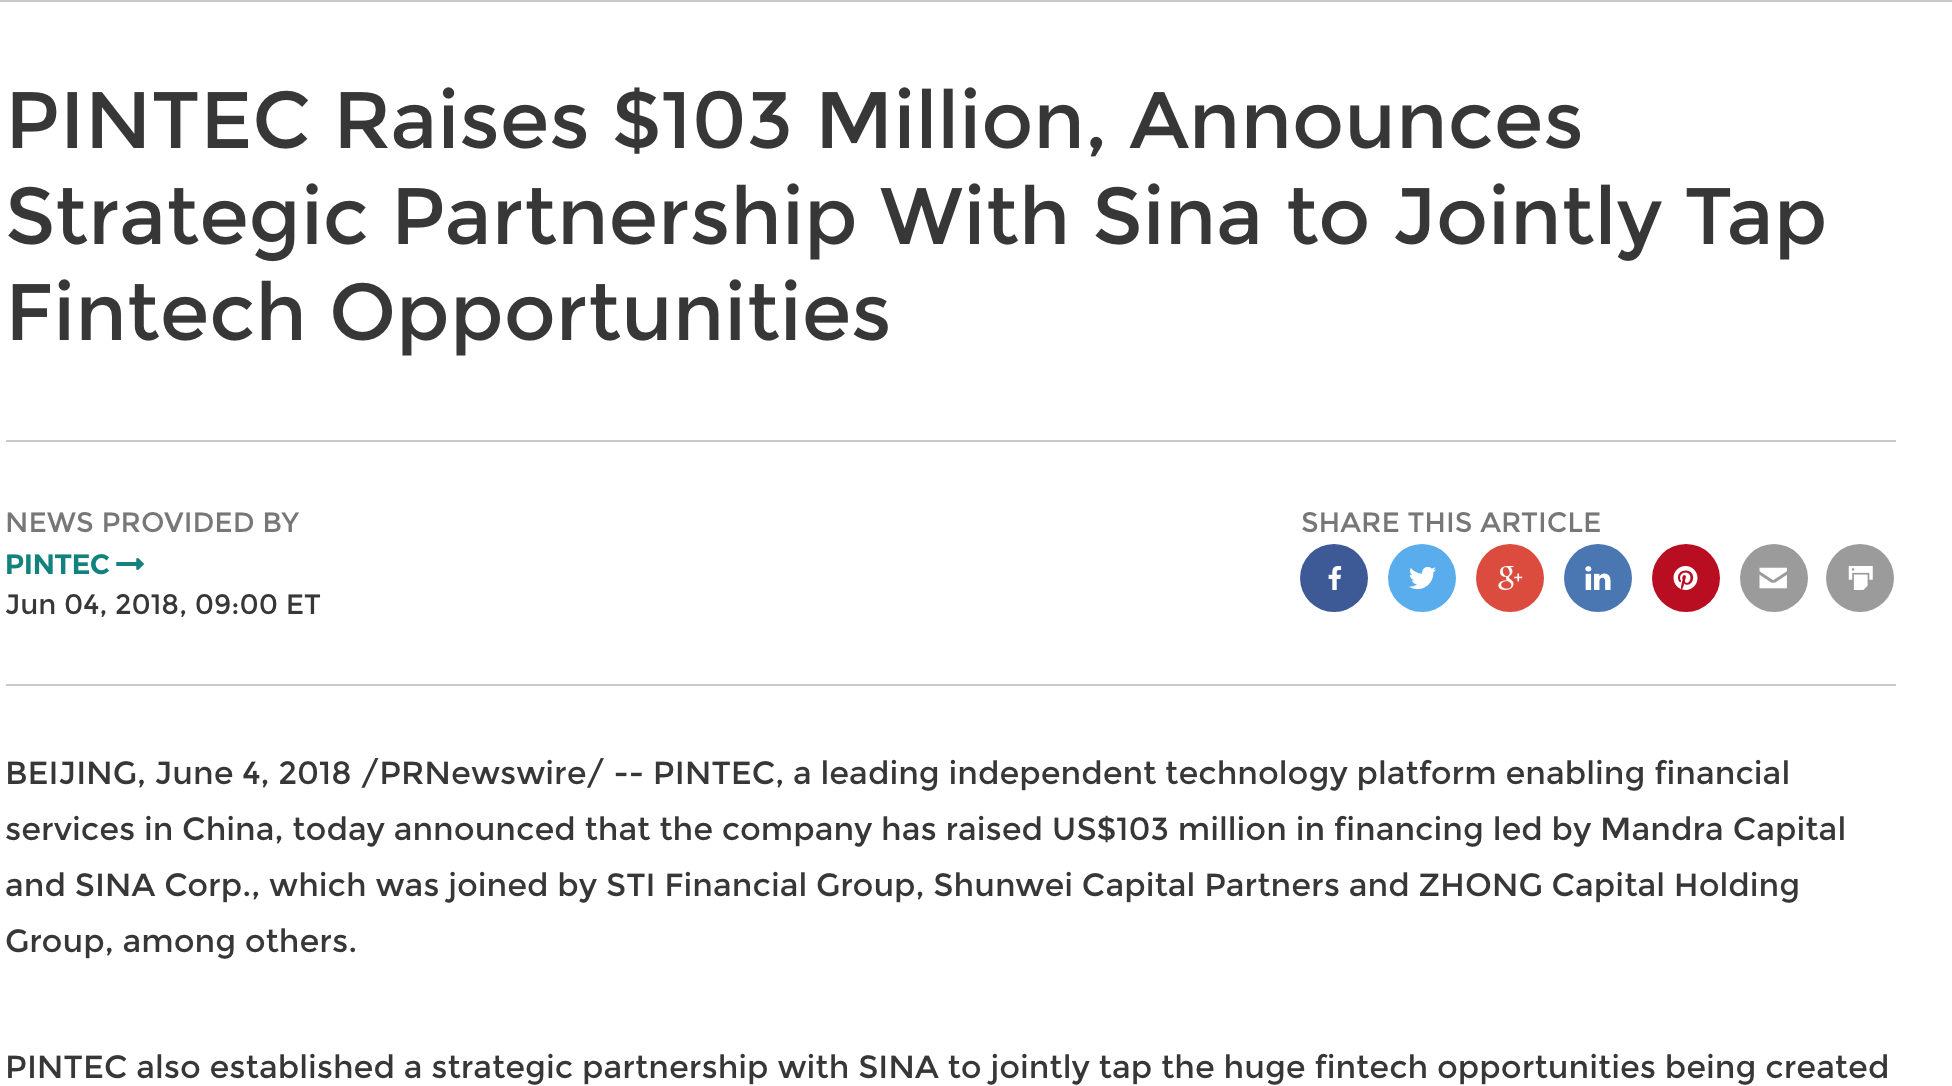 PIVOT's shareholder raises new capital in strategic partnership with Sina Corp to tap fintech opportunities using data and AI